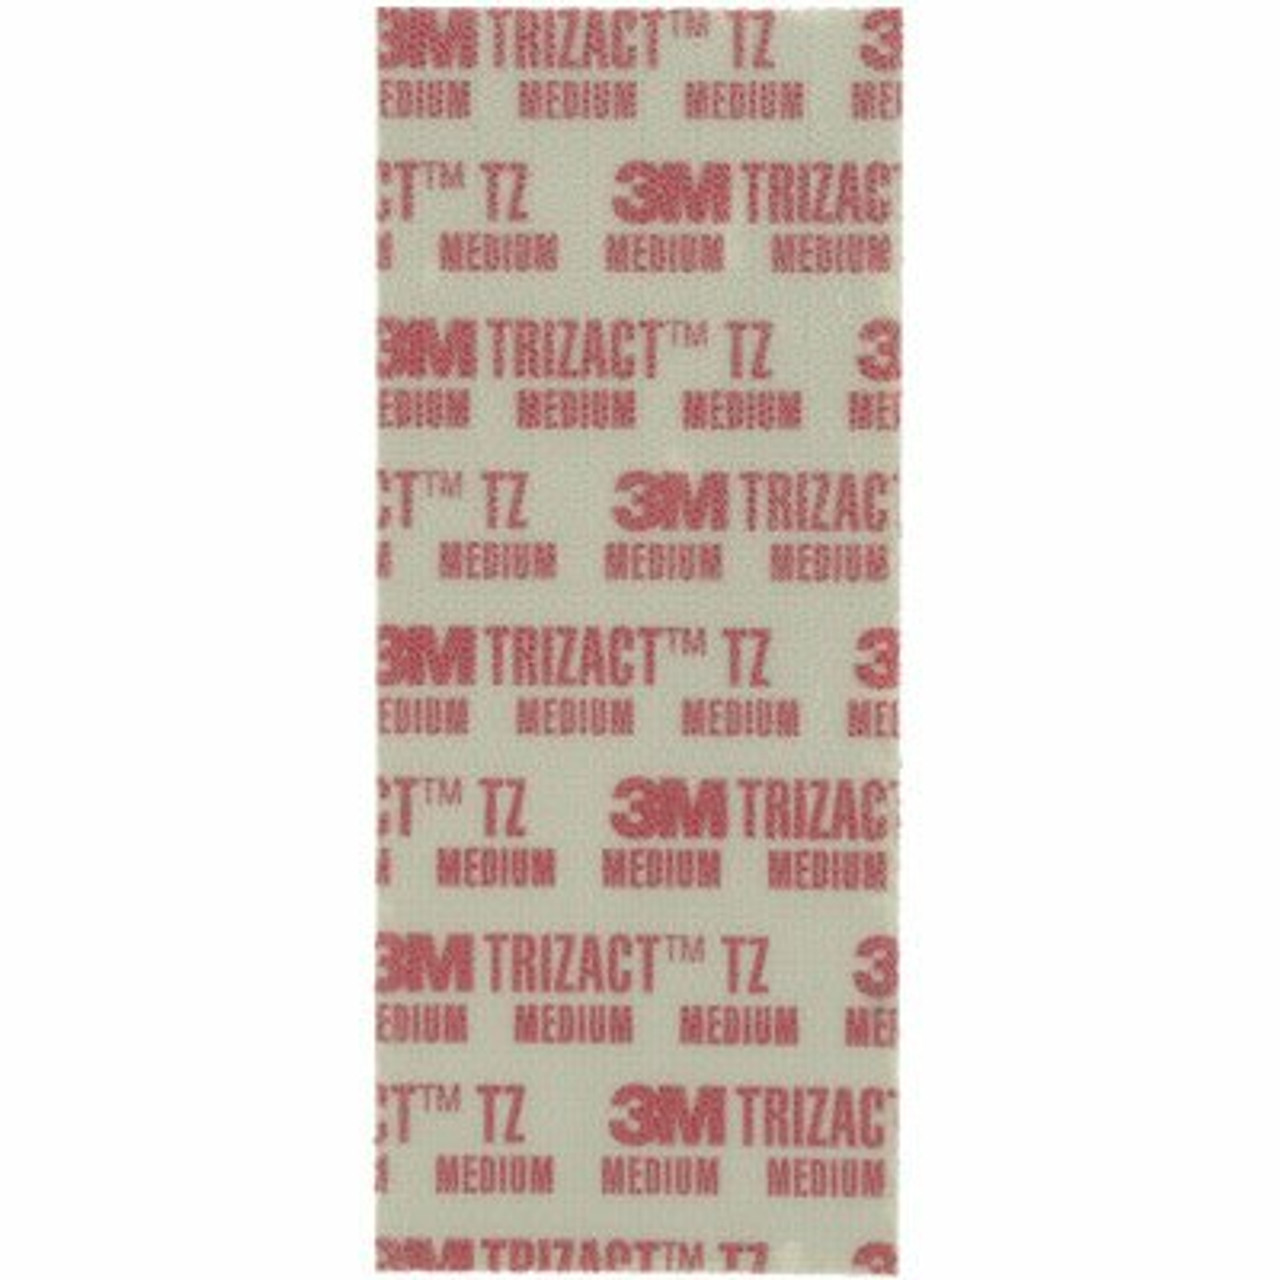 3M Trizact Diamond Buffing Floor Pad, Red (6-Count)